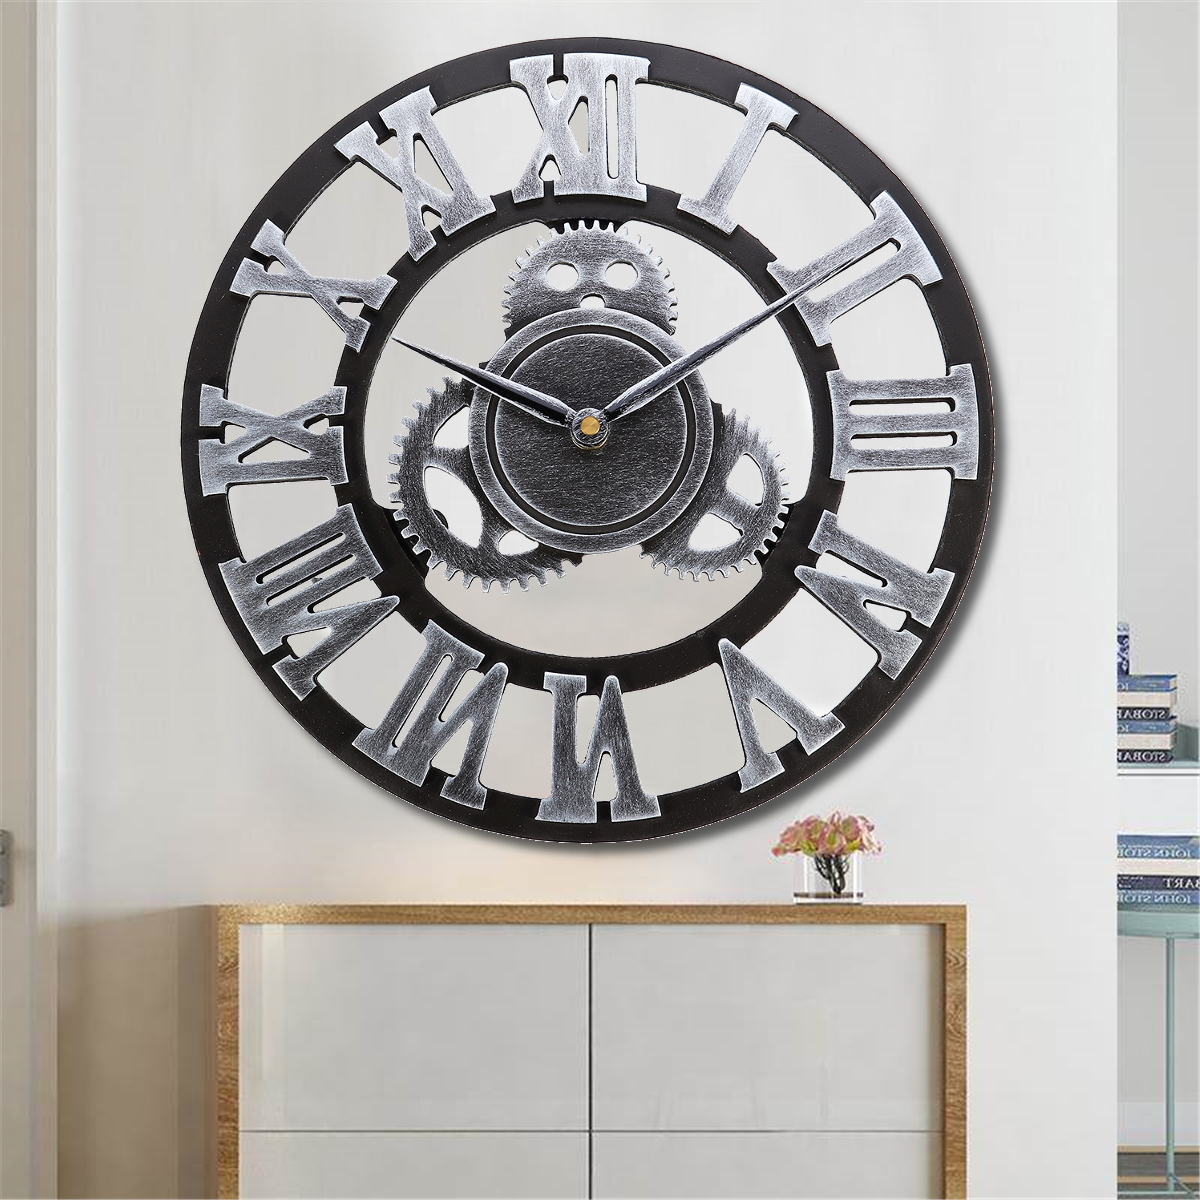 

3D Gear Large Wall Clock Vintage Retro Roman Numerals Silent Sweep Non-ticking